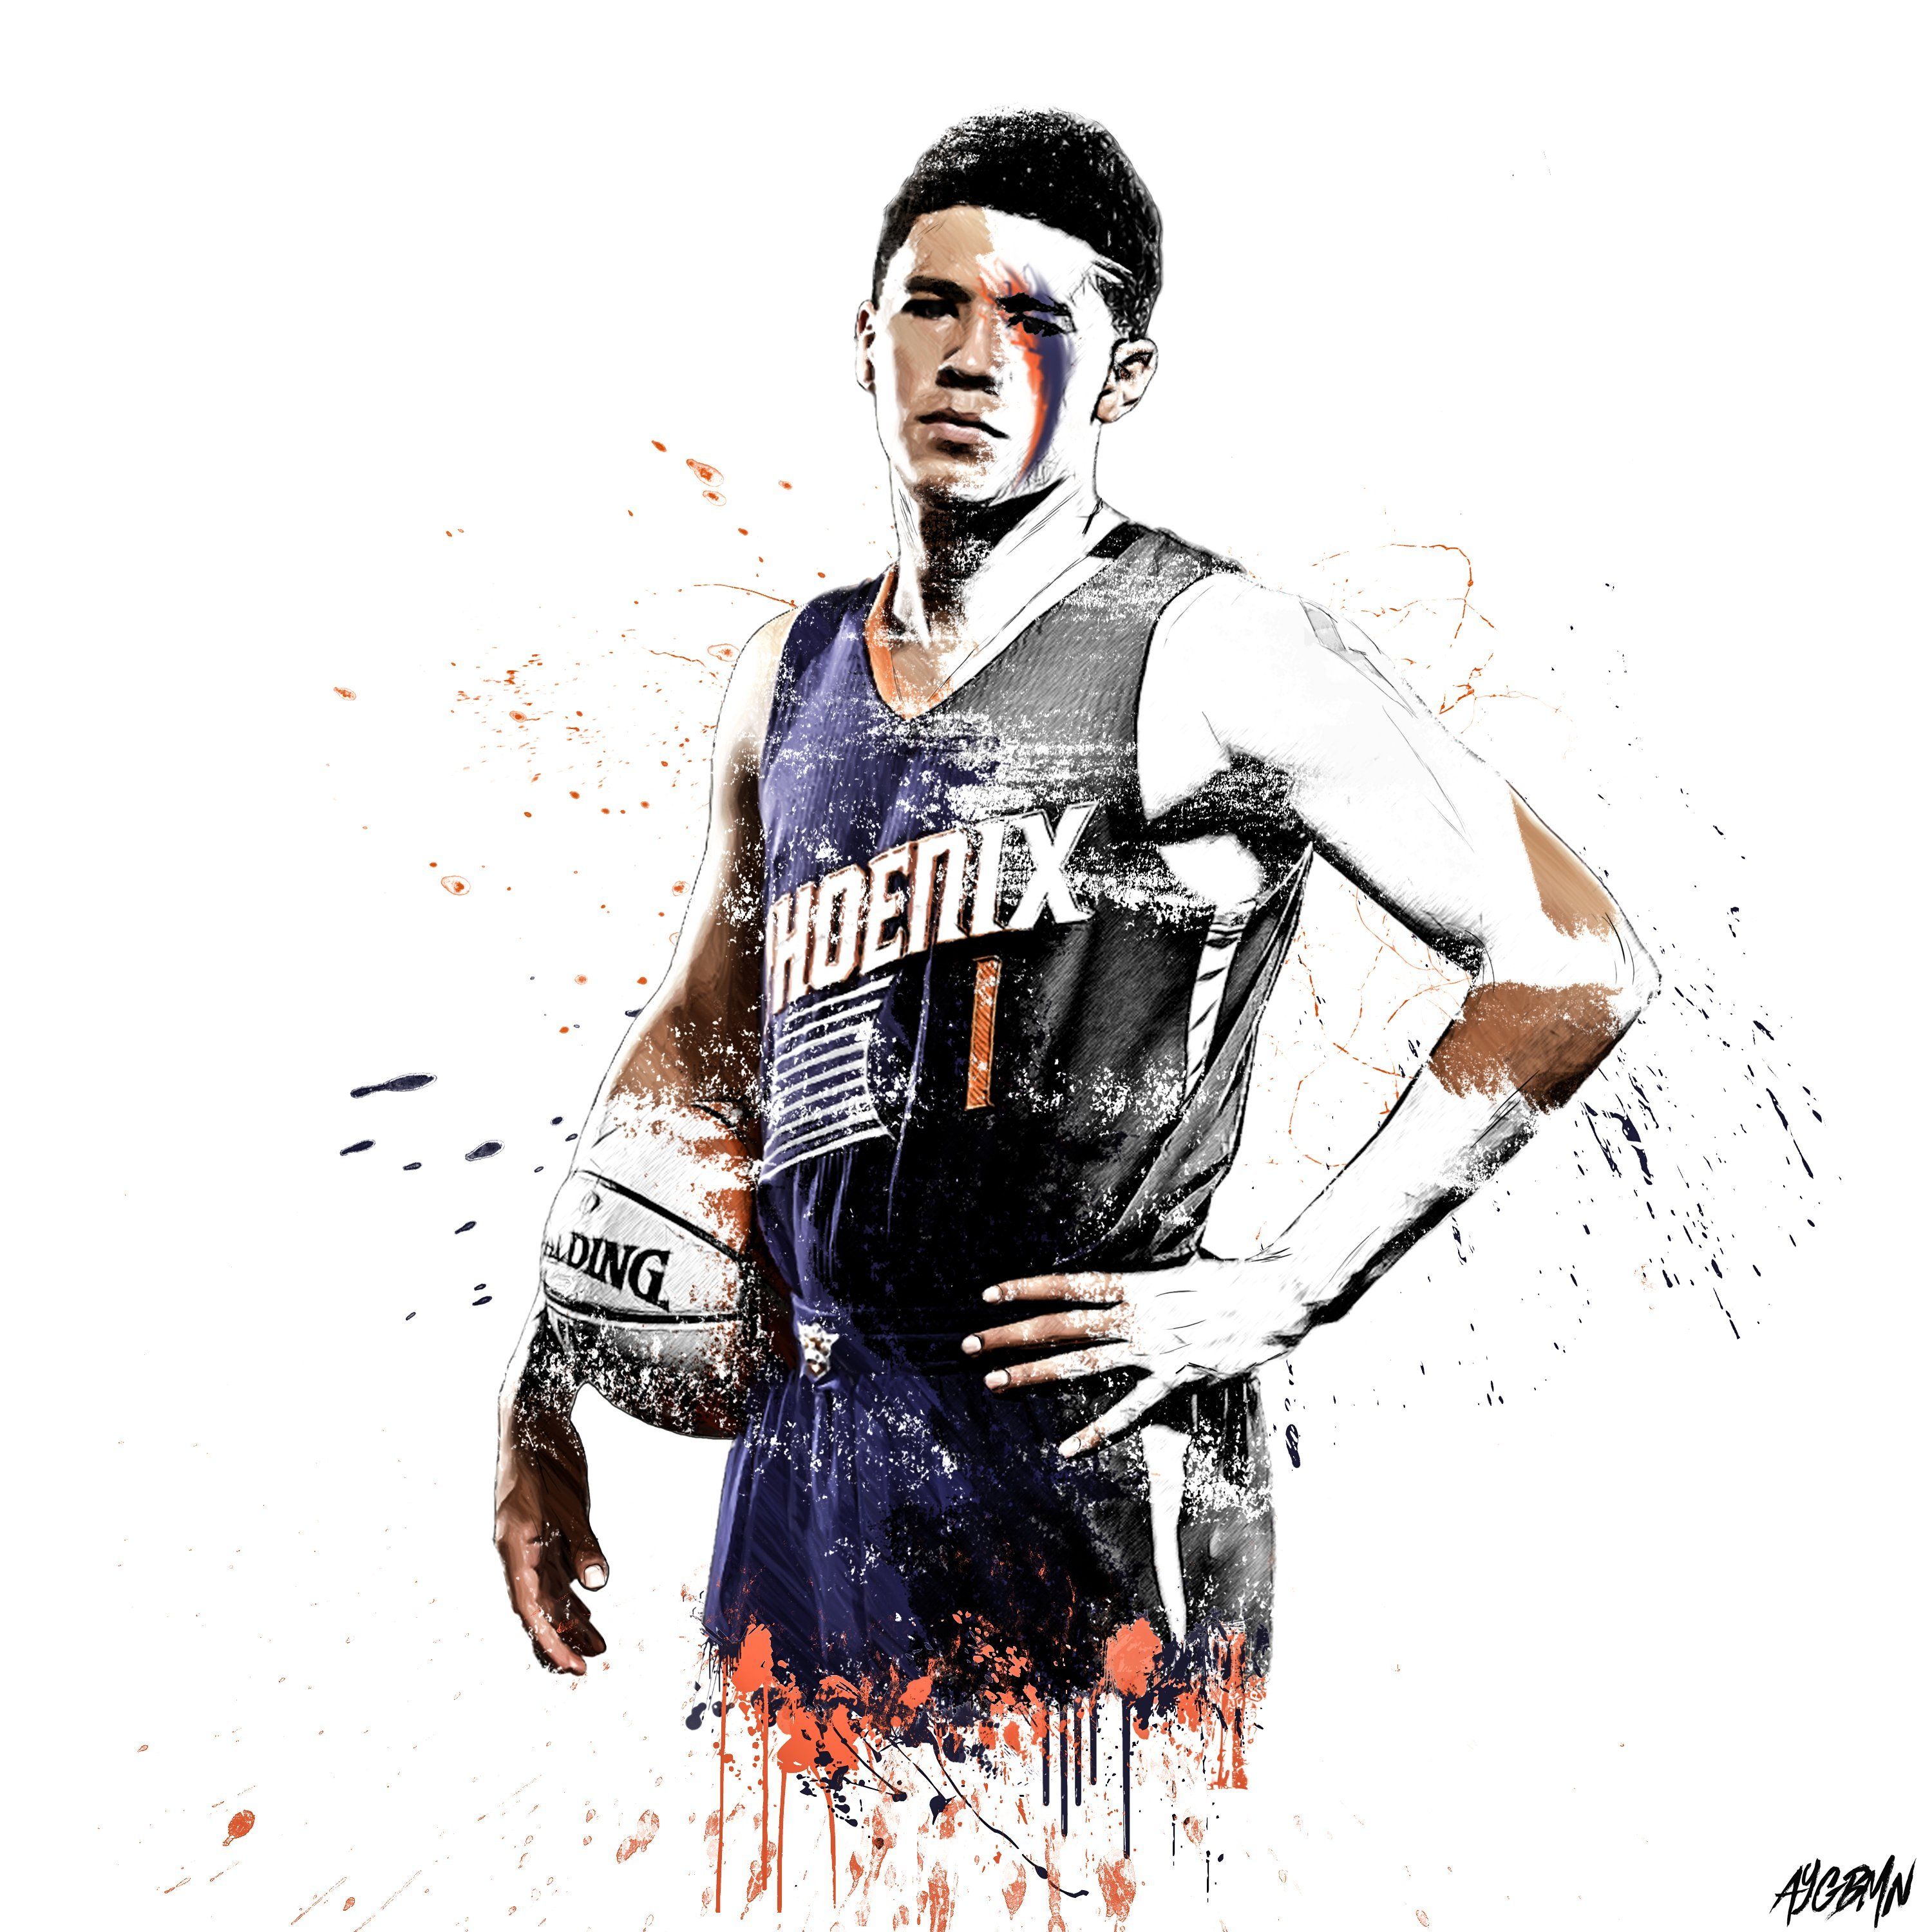 Free download Devin Booker Wallpaper Phoenix Suns by Aygbmn 4304 Wallpaper and [3000x3000] for your Desktop, Mobile & Tablet. Explore Devin Booker Wallpaper. Devin Booker Wallpaper